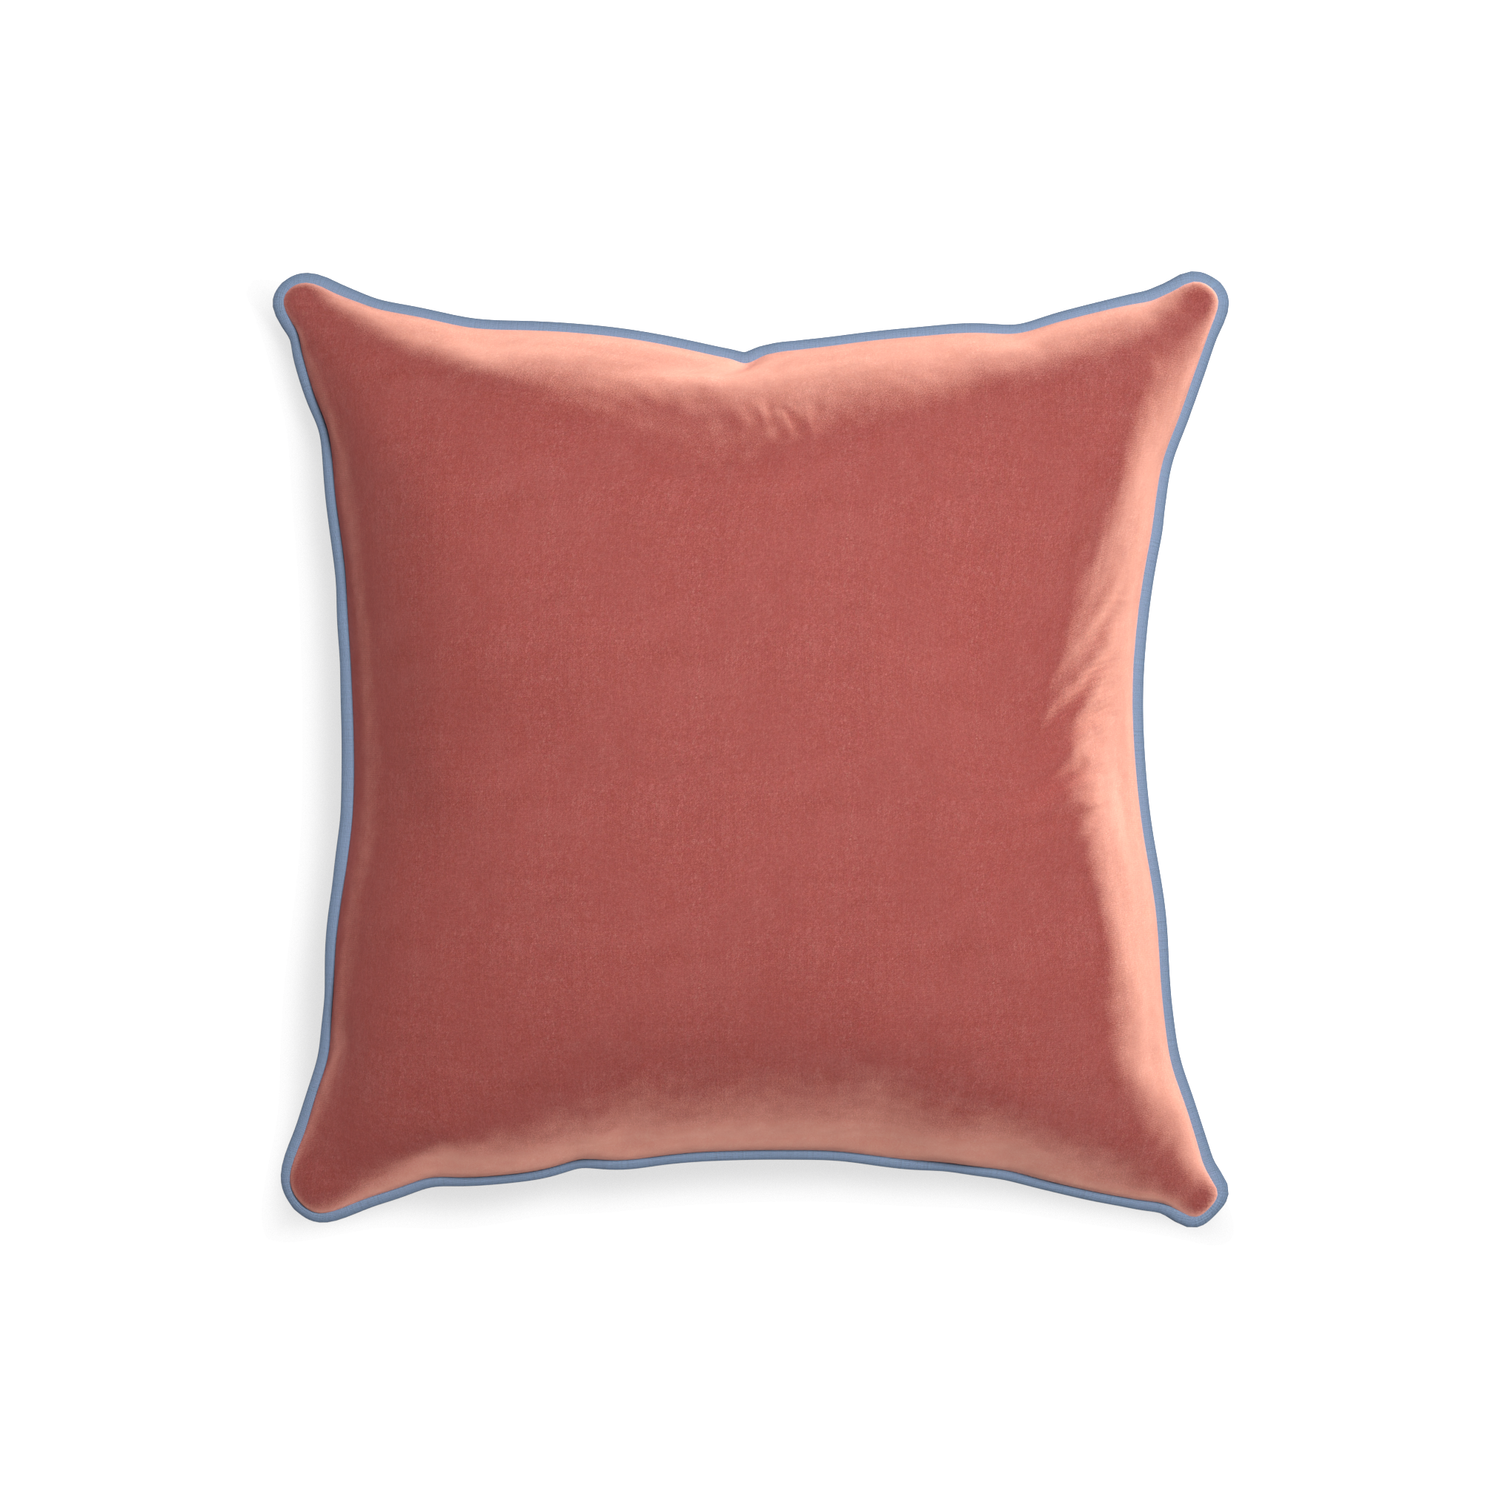 20-square cosmo velvet custom pillow with sky piping on white background